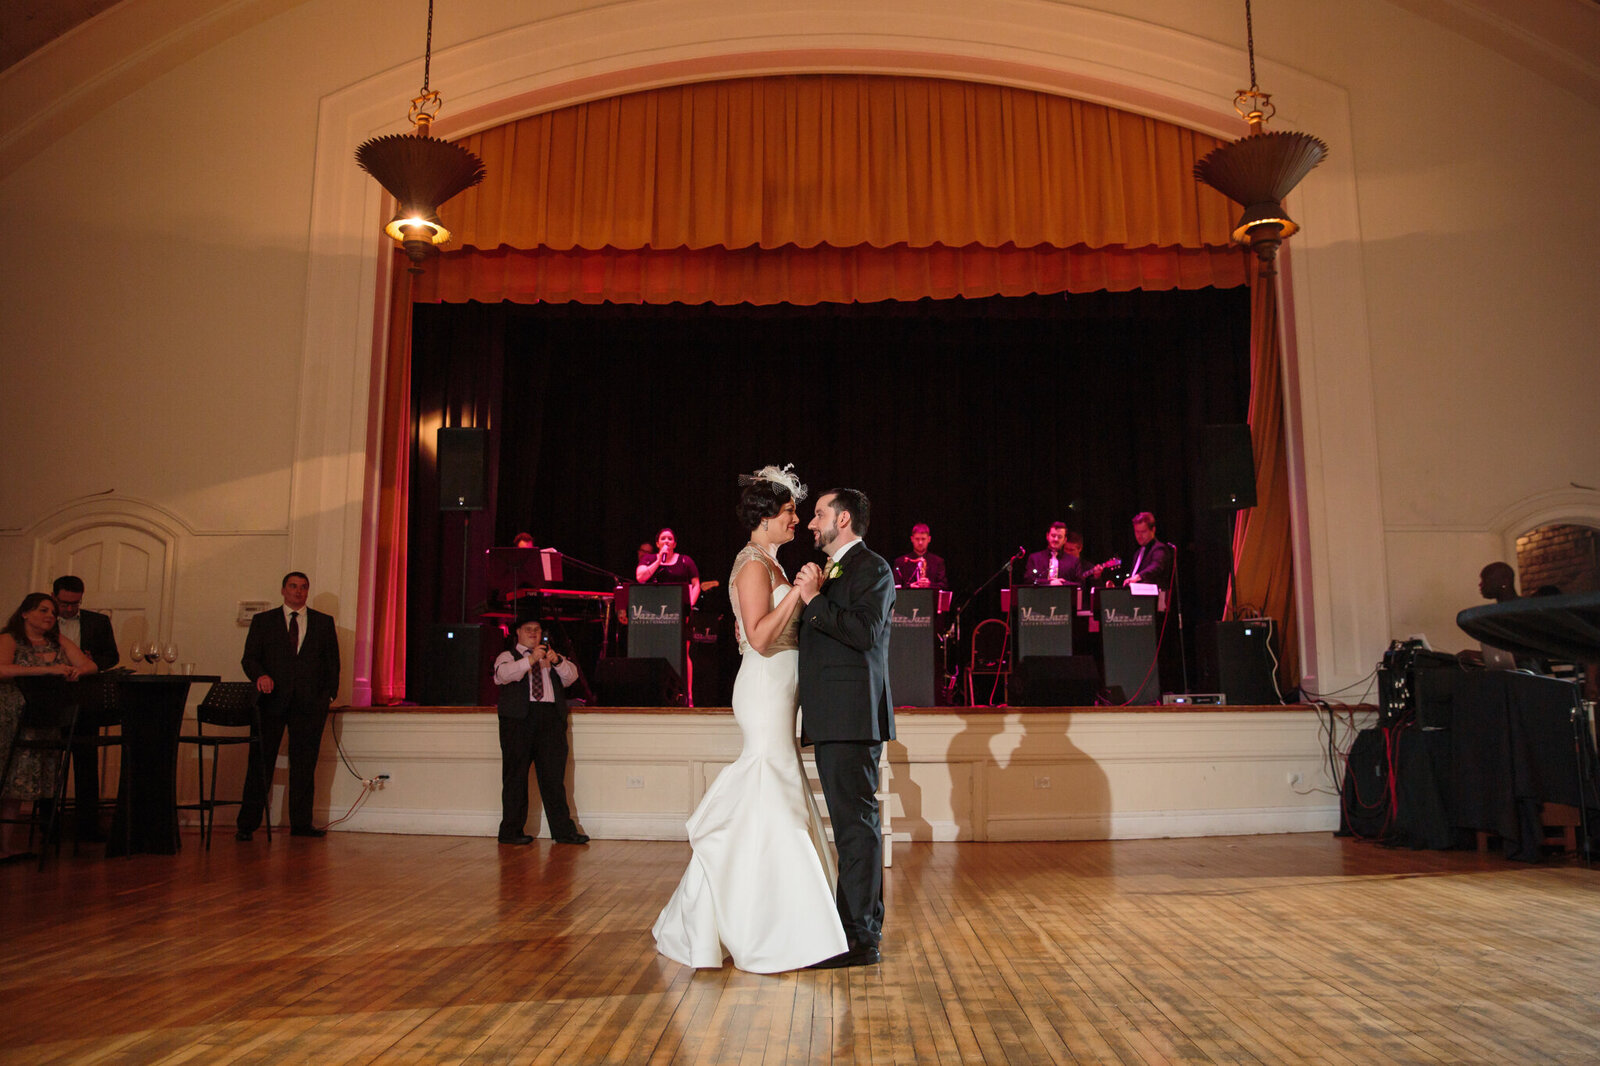 Bride and groom have their first dance as a married couple